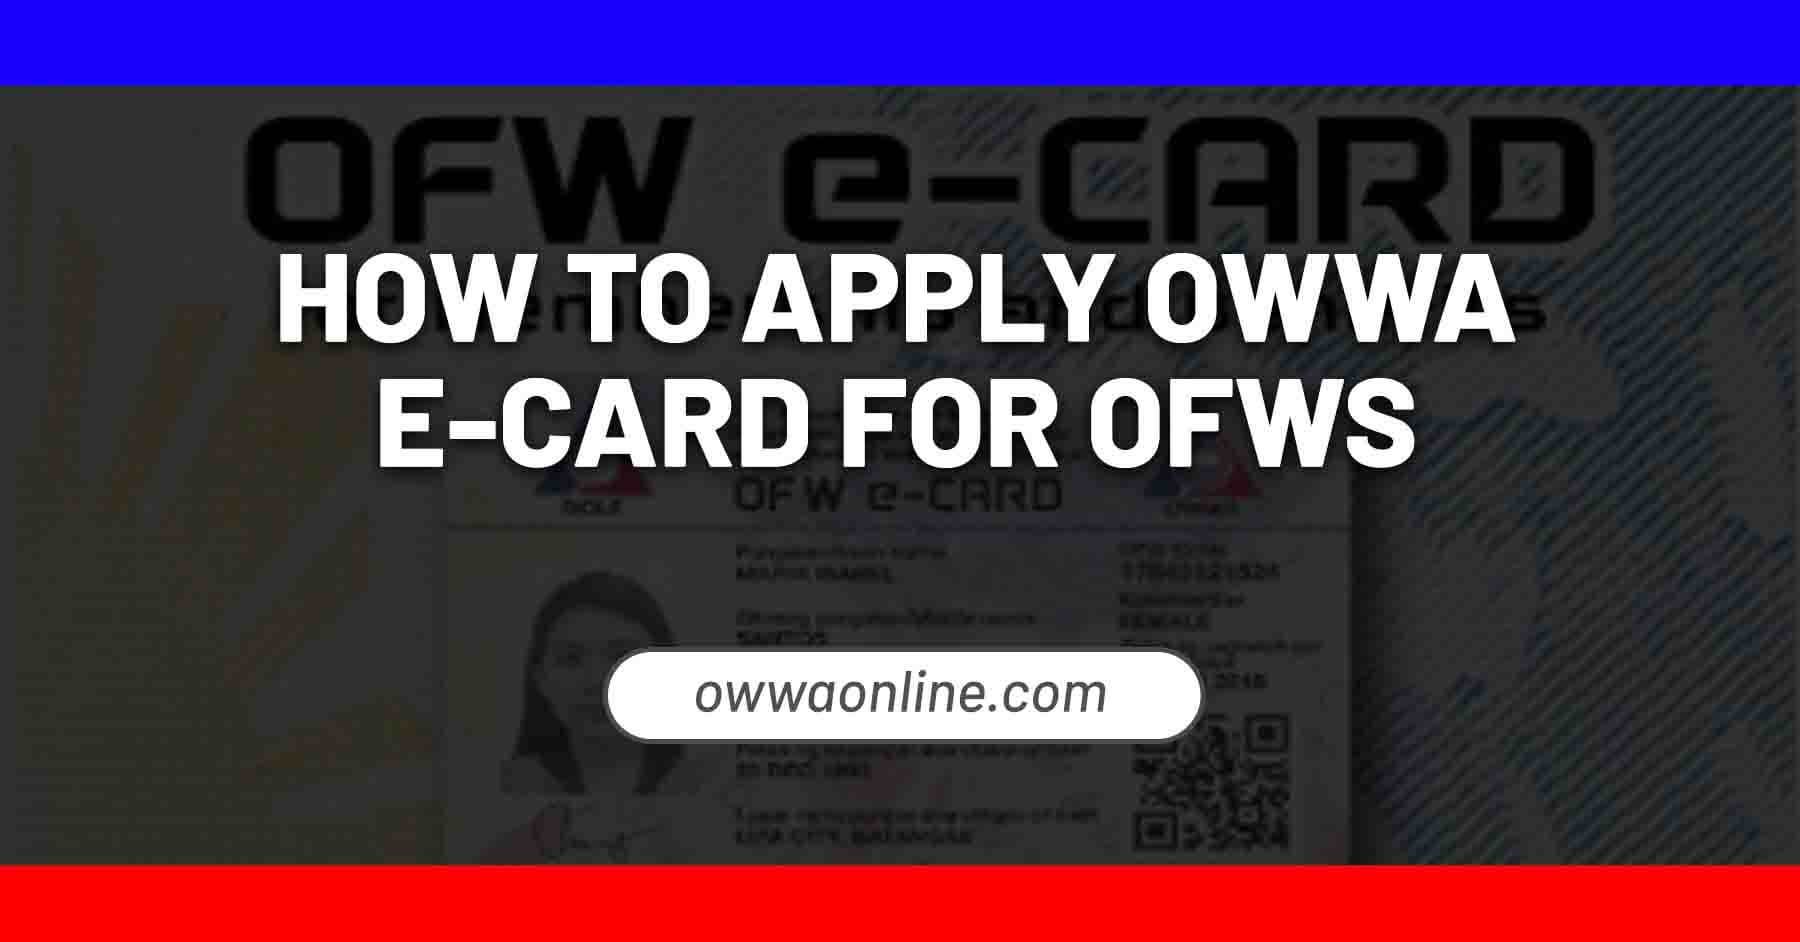 how to apply for ofw ecard owwa for ofws